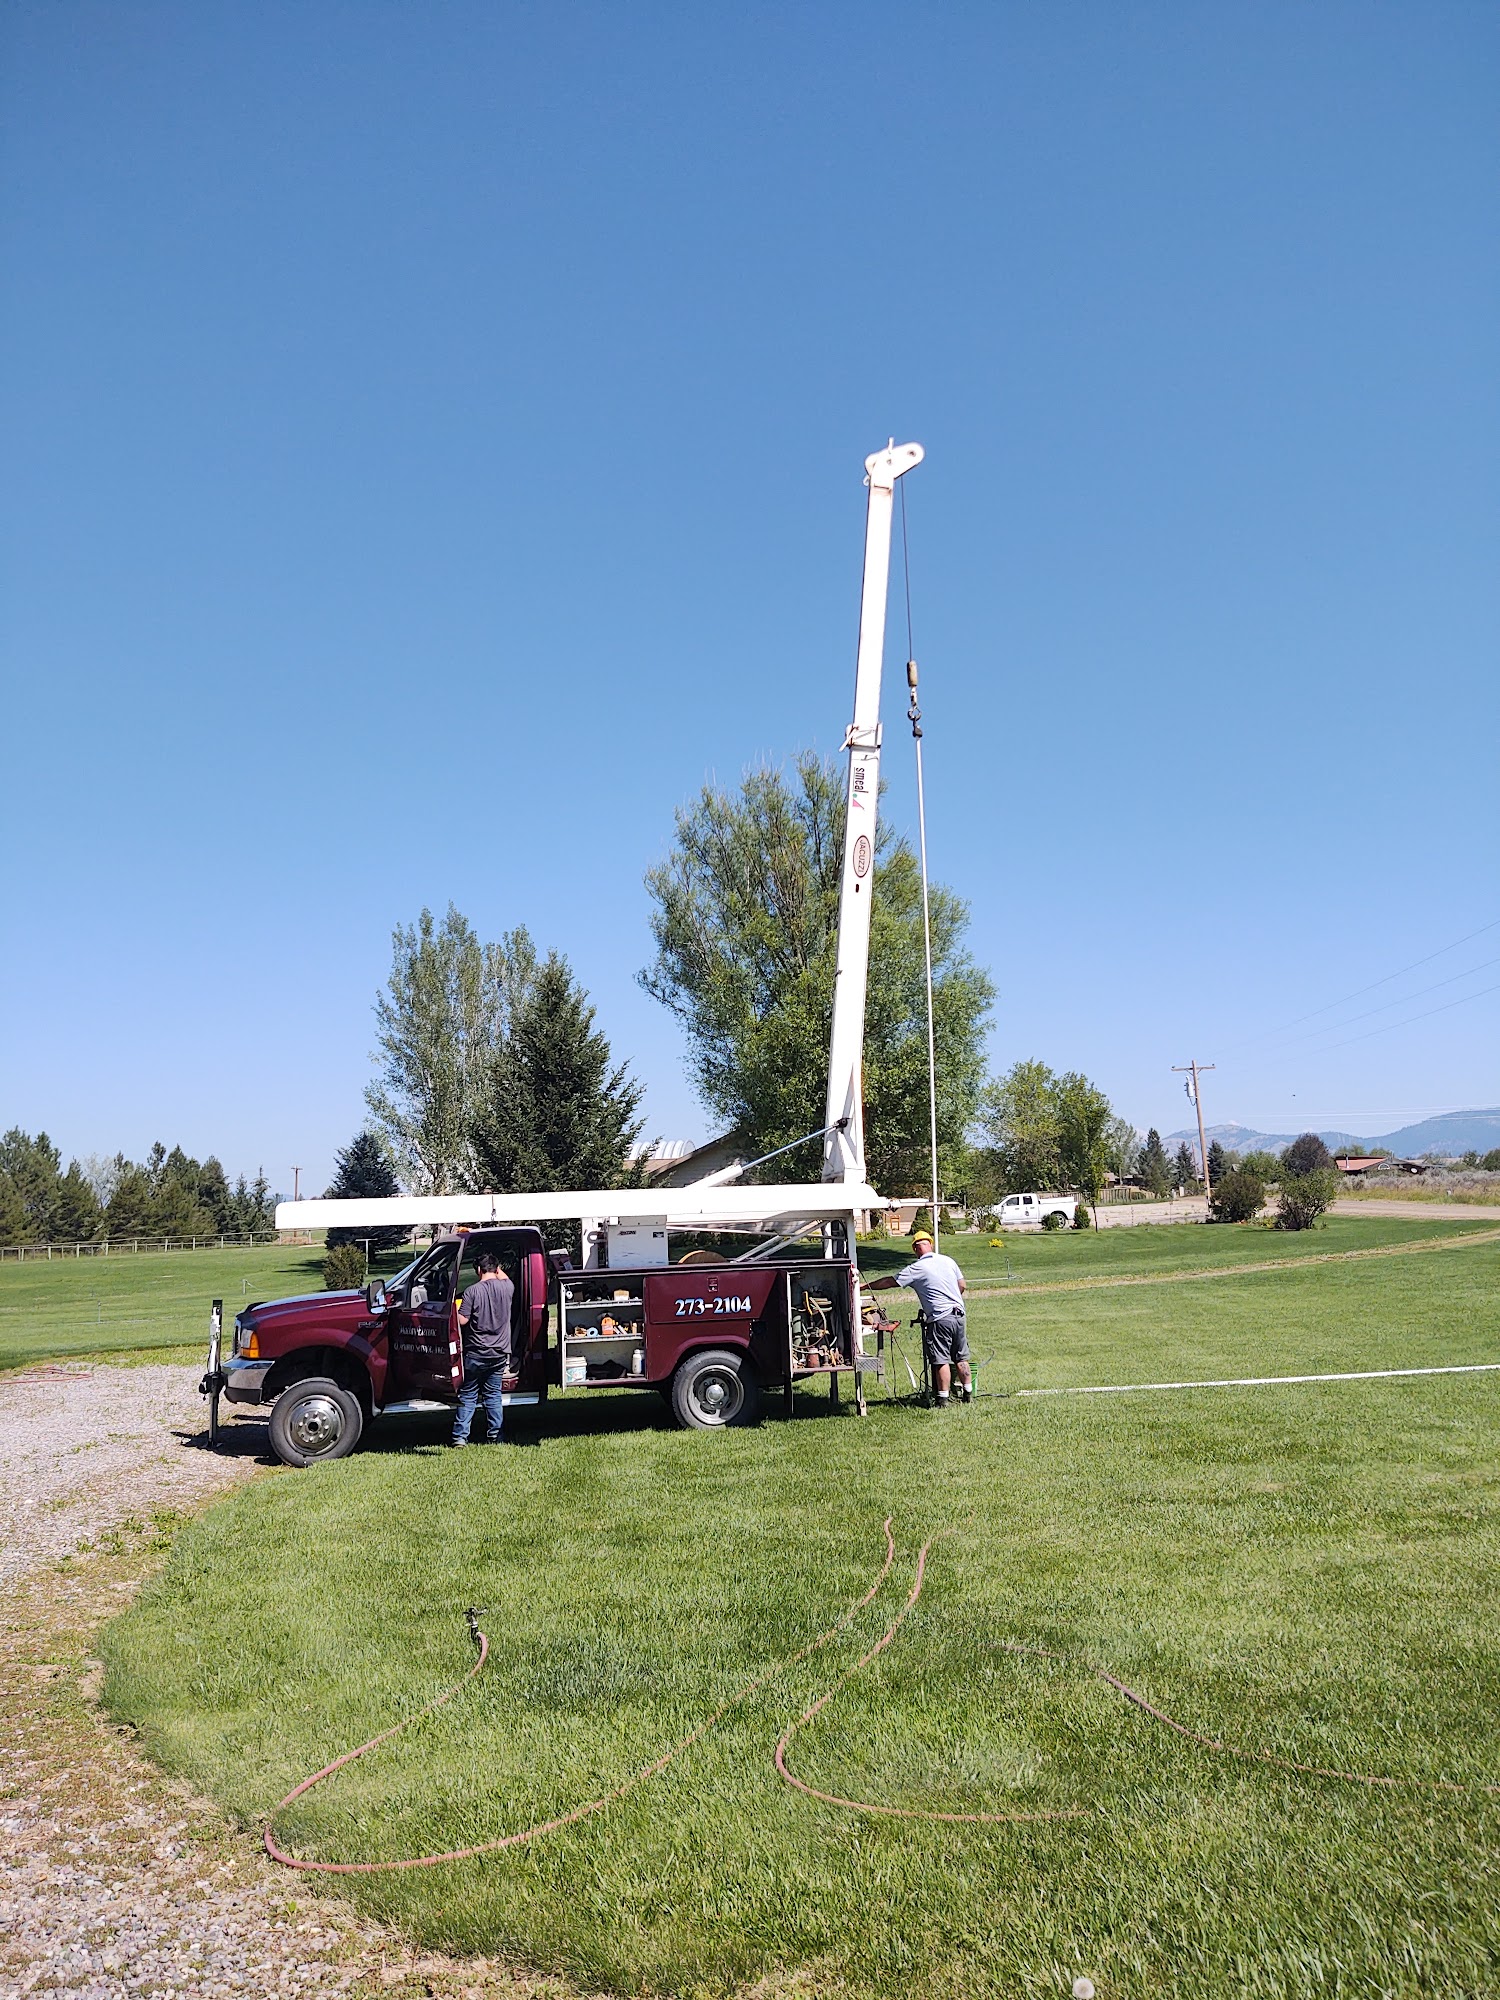 Mike Maclay Electric and pump service 528 Shanna Ct, Stevensville Montana 59870